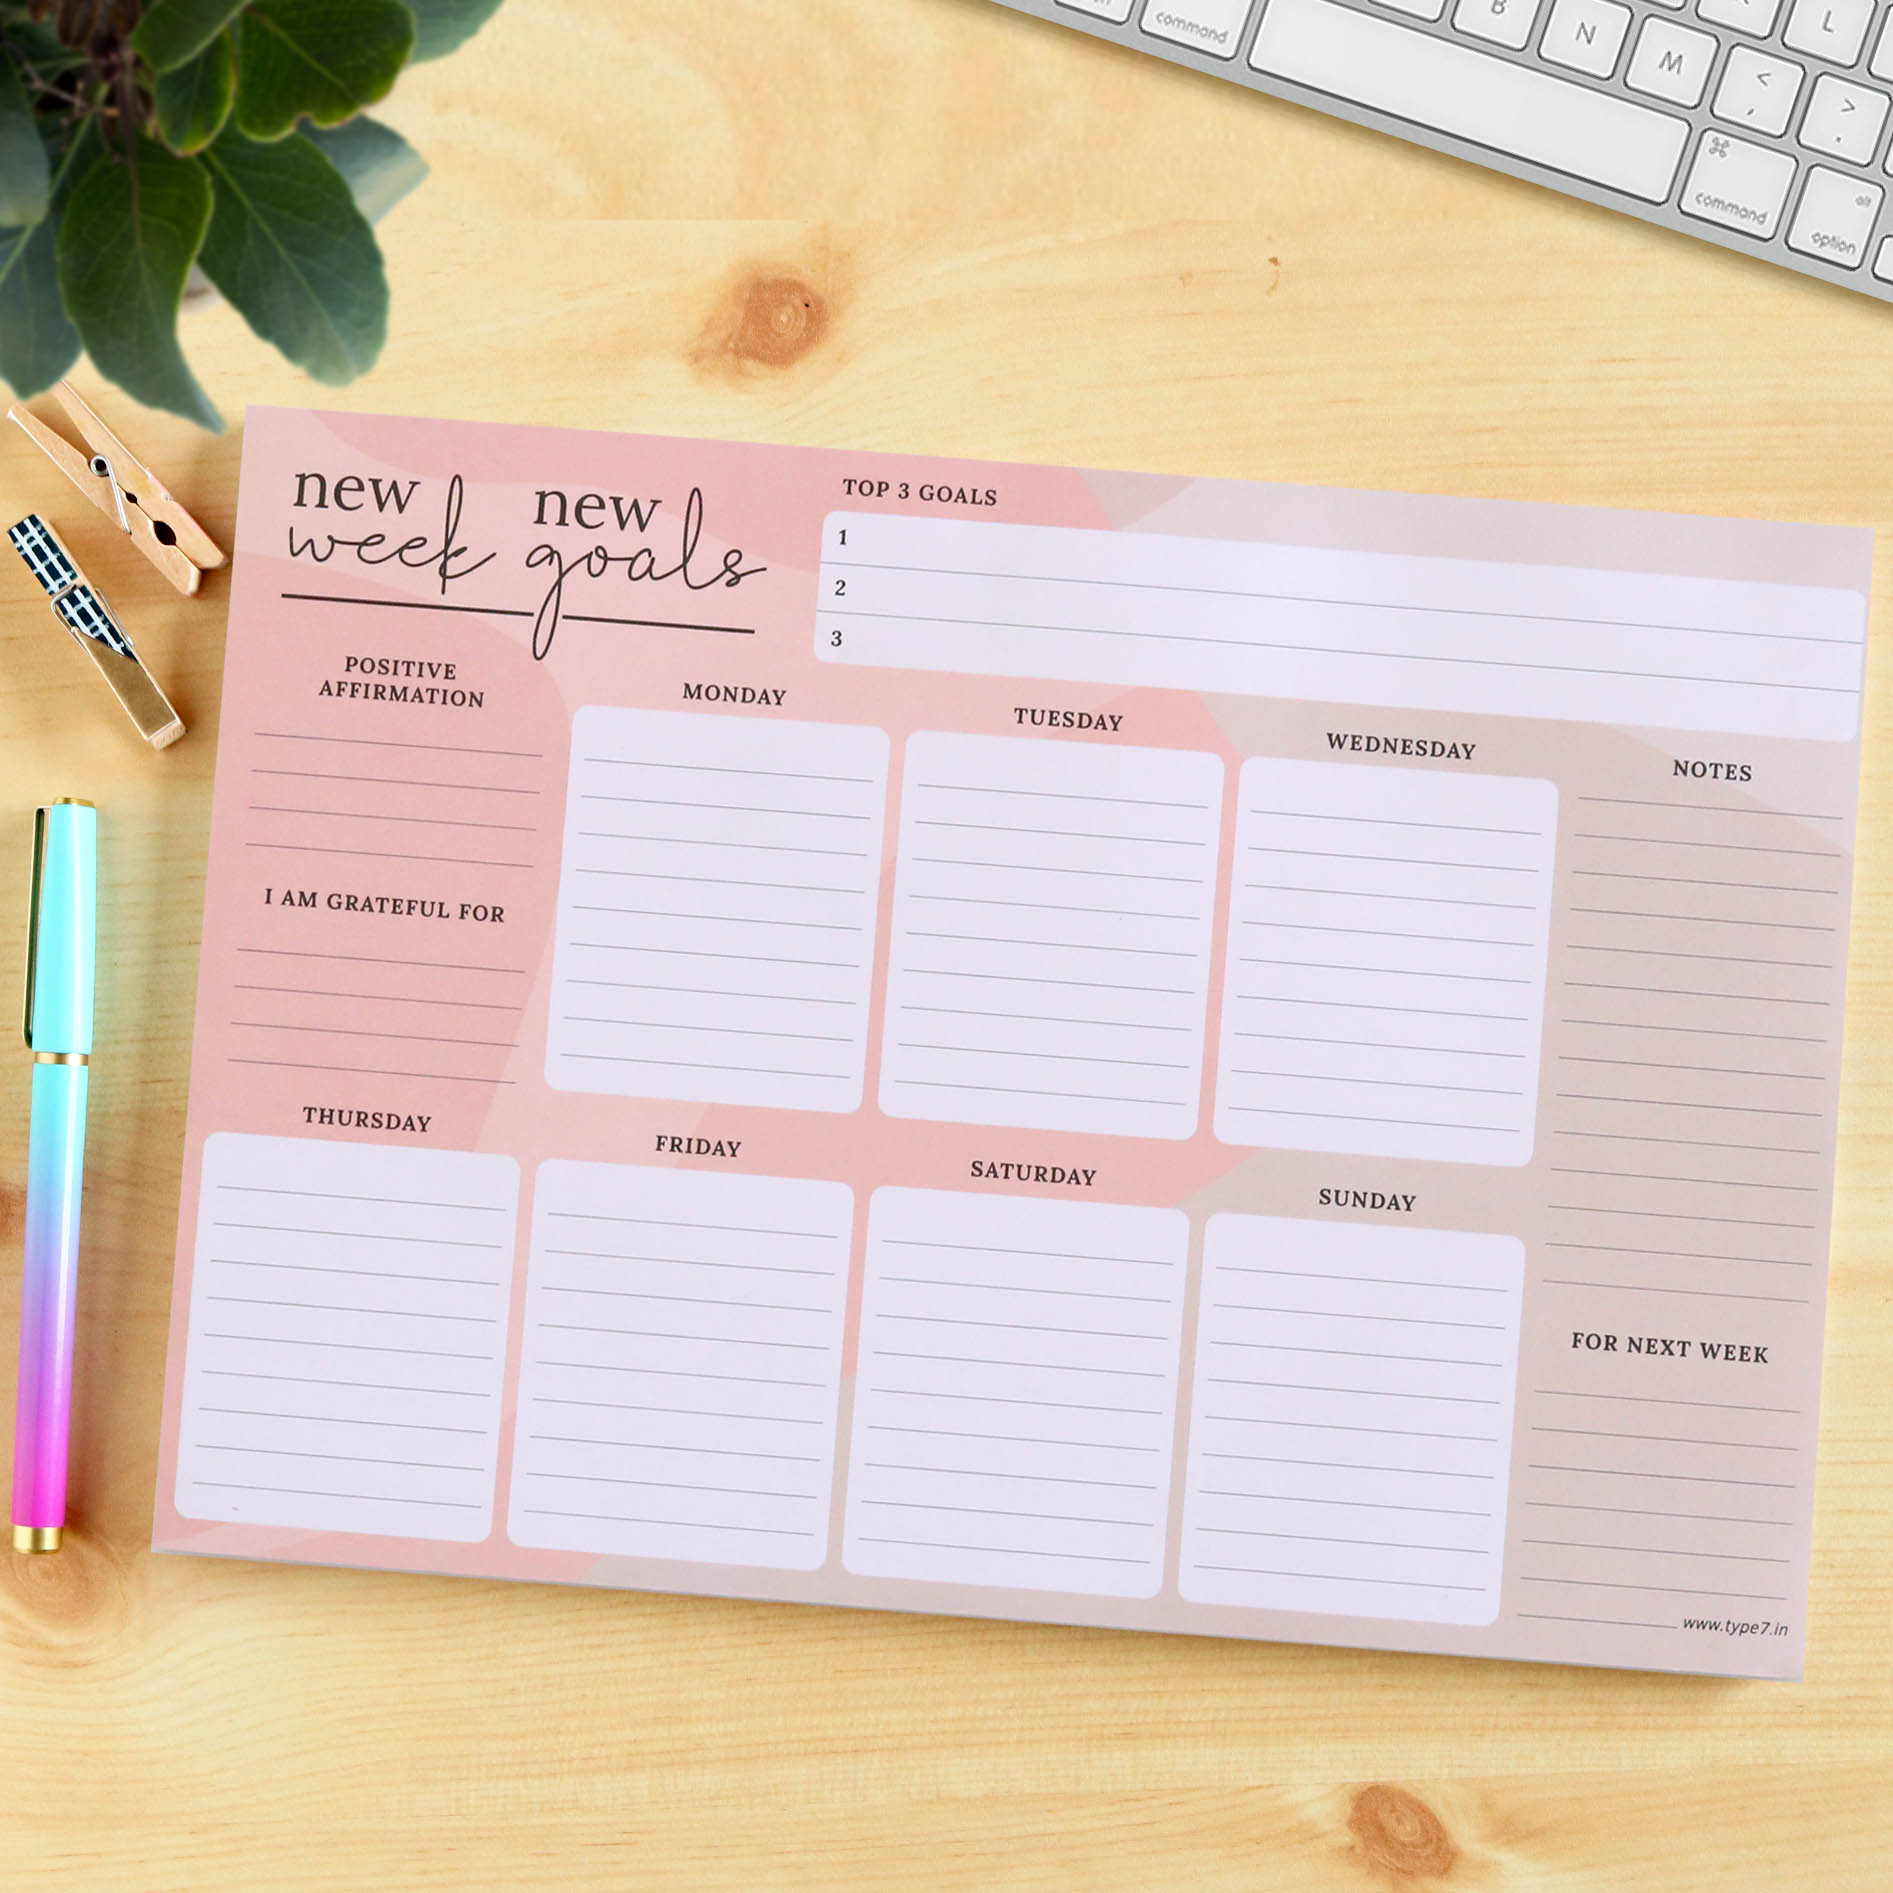 Organise Your Life - Ultimate Stationery Combo